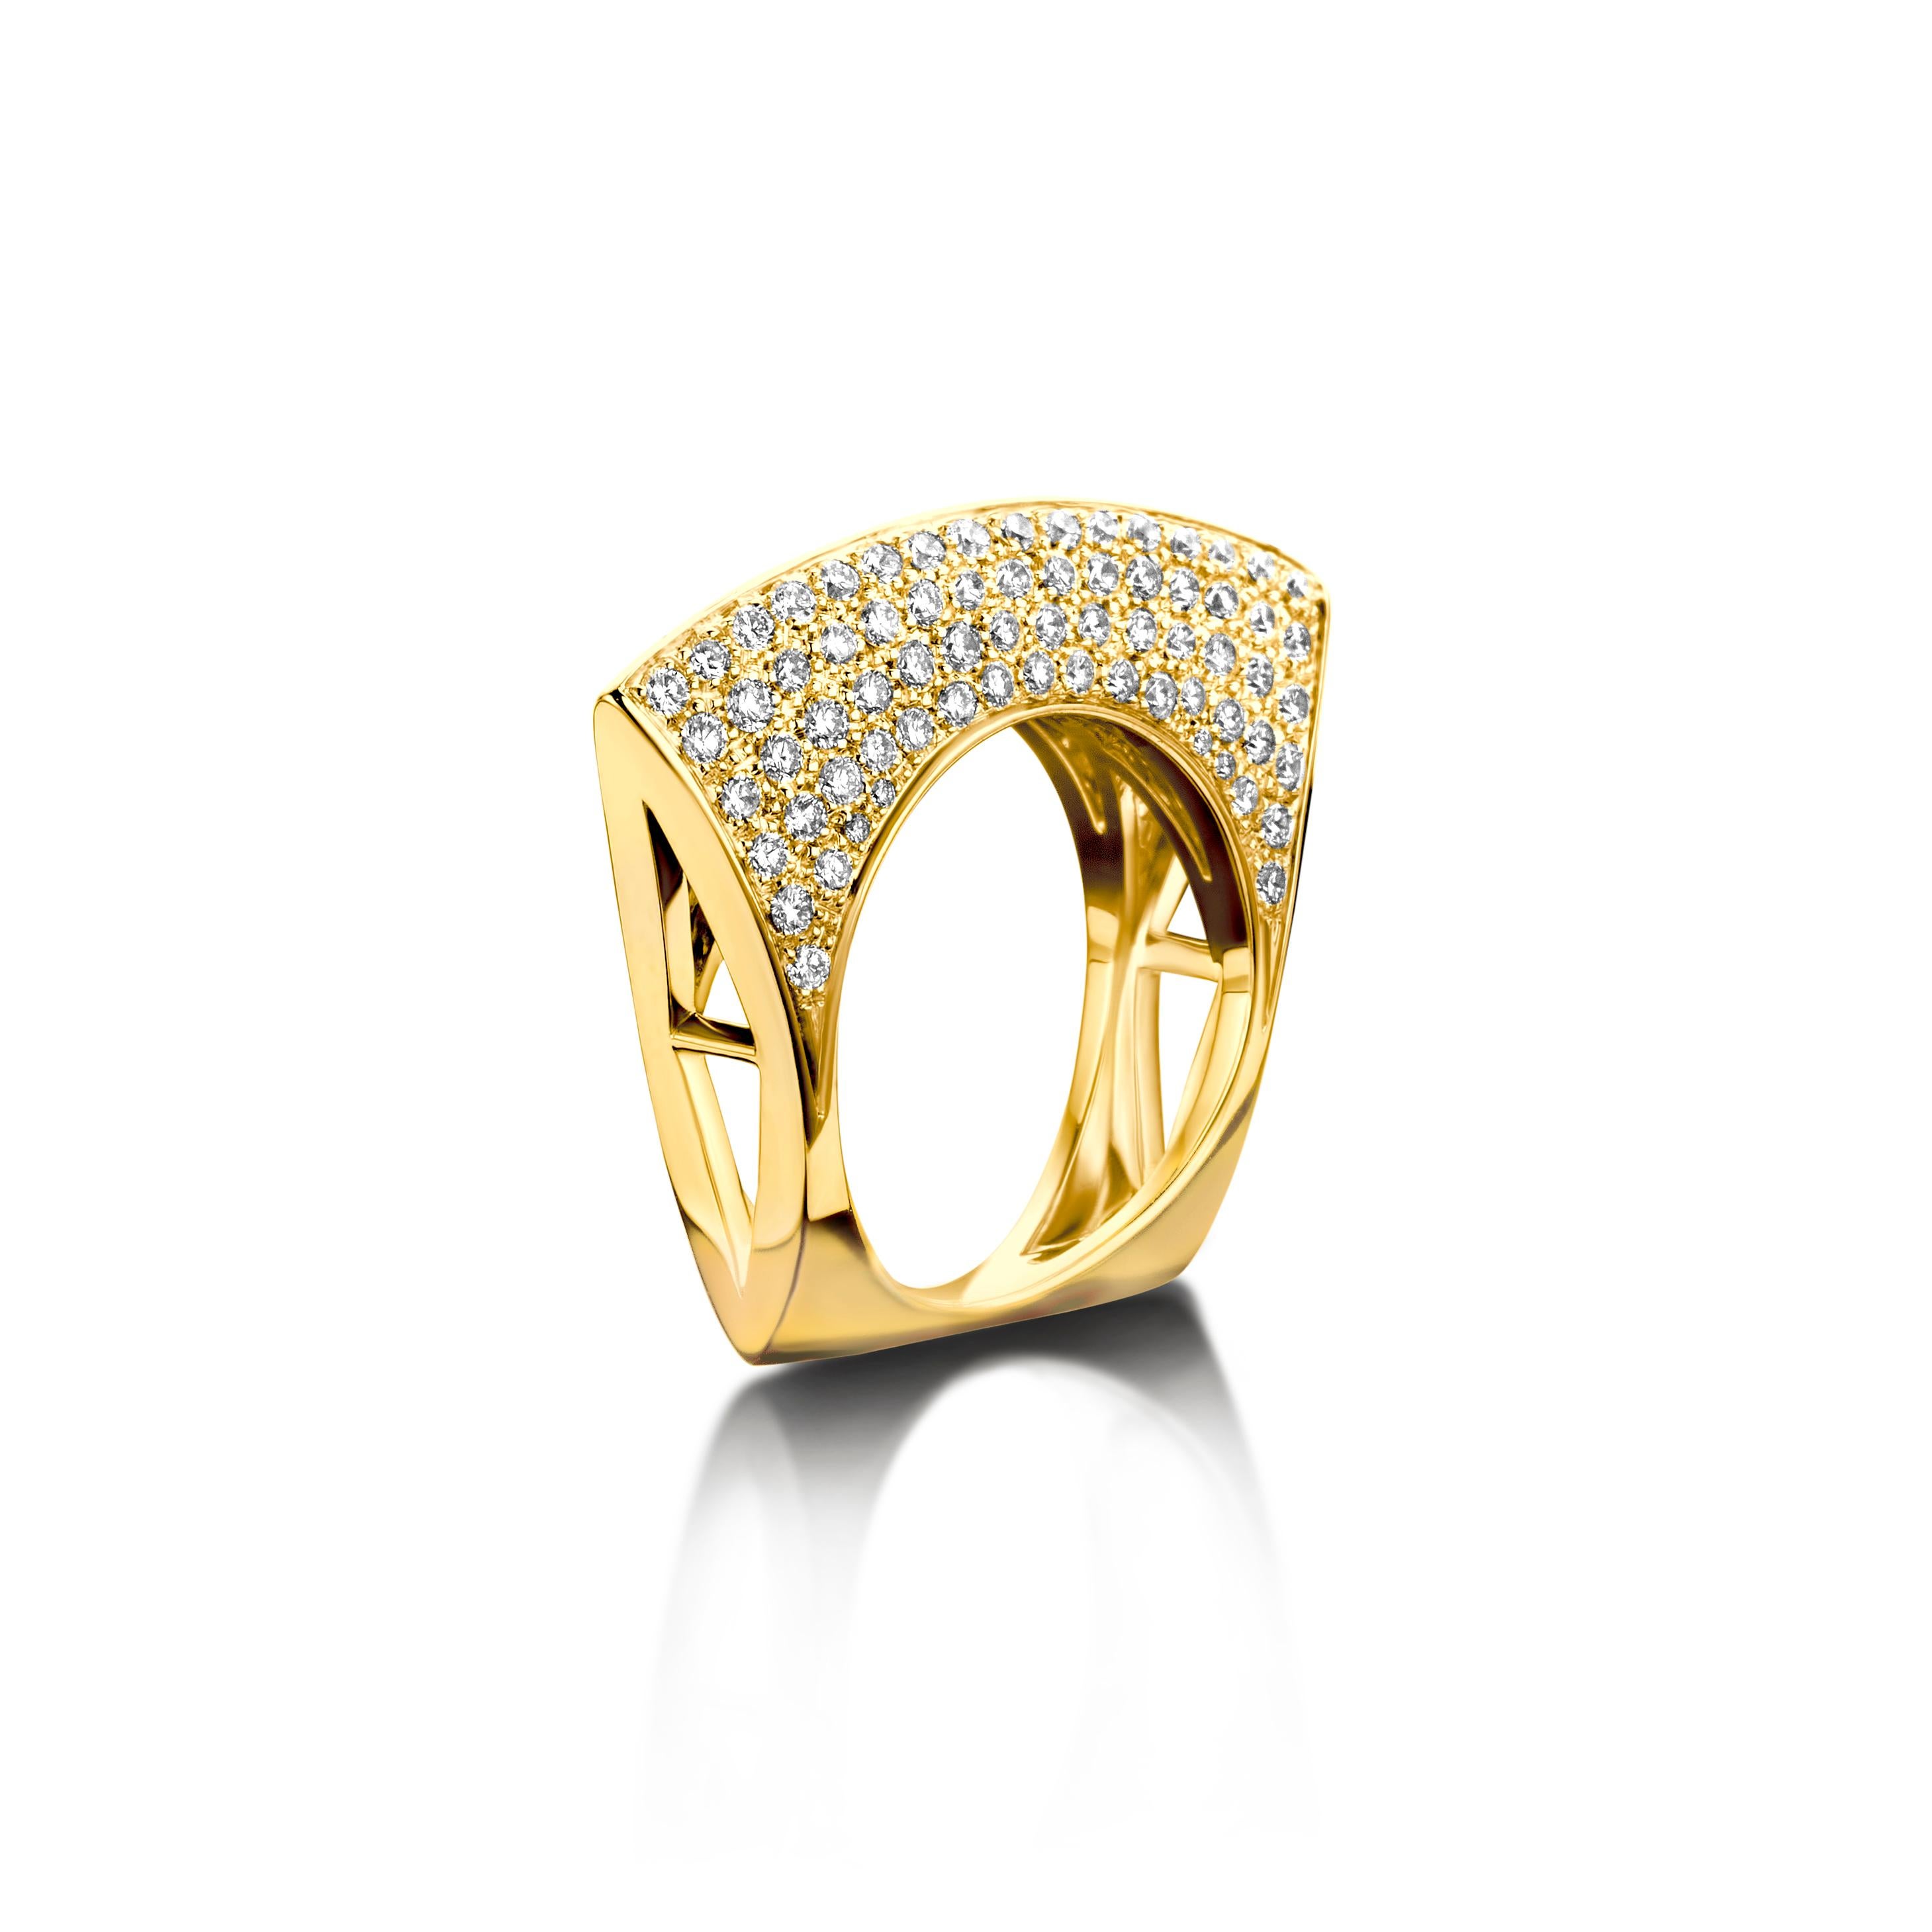 Representing Rebirth, the Lotus Ring captures the essence of the BARE vision. 18kt Yellow Gold and 1.89ct of natural, White Diamonds.

This ring has a regular size. We recommend to select your usual size.